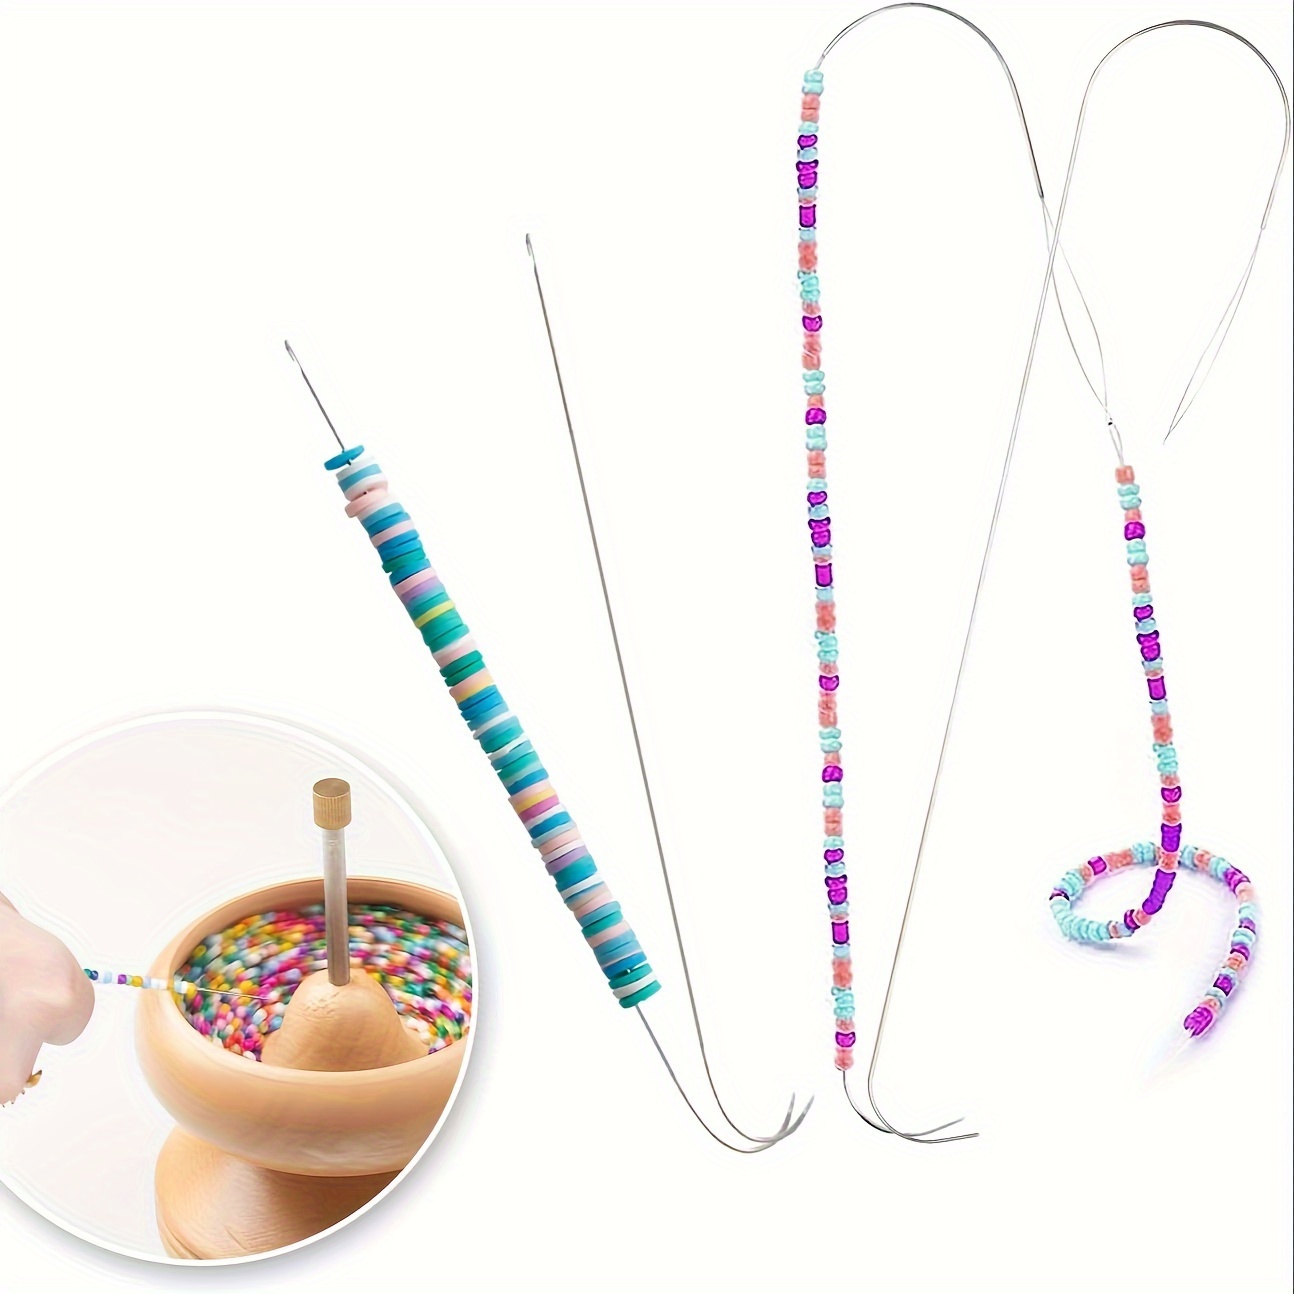 1-5pcs Beaded-Needle-Pins-Open-Needles-DIY-Beads-Bracelet-Jewelry-Tools- Necklace-Making-Supplies